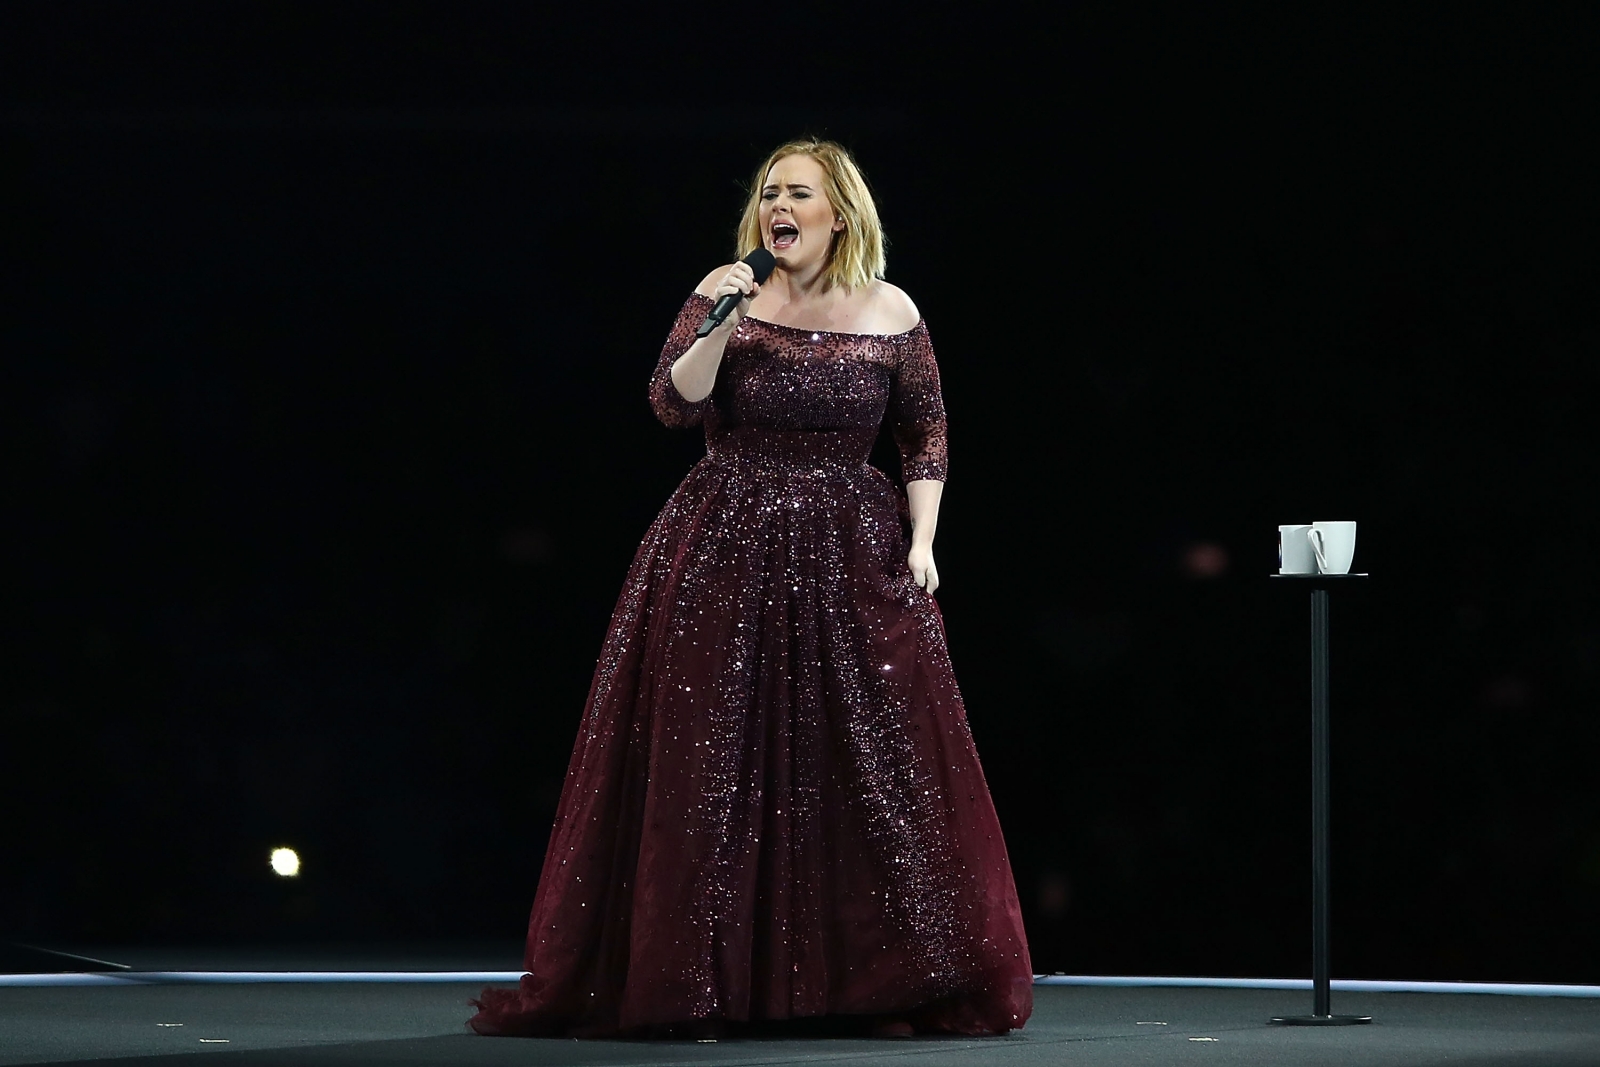 Adele almost falls over as she trips over gown during Brisbane concert1600 x 1067